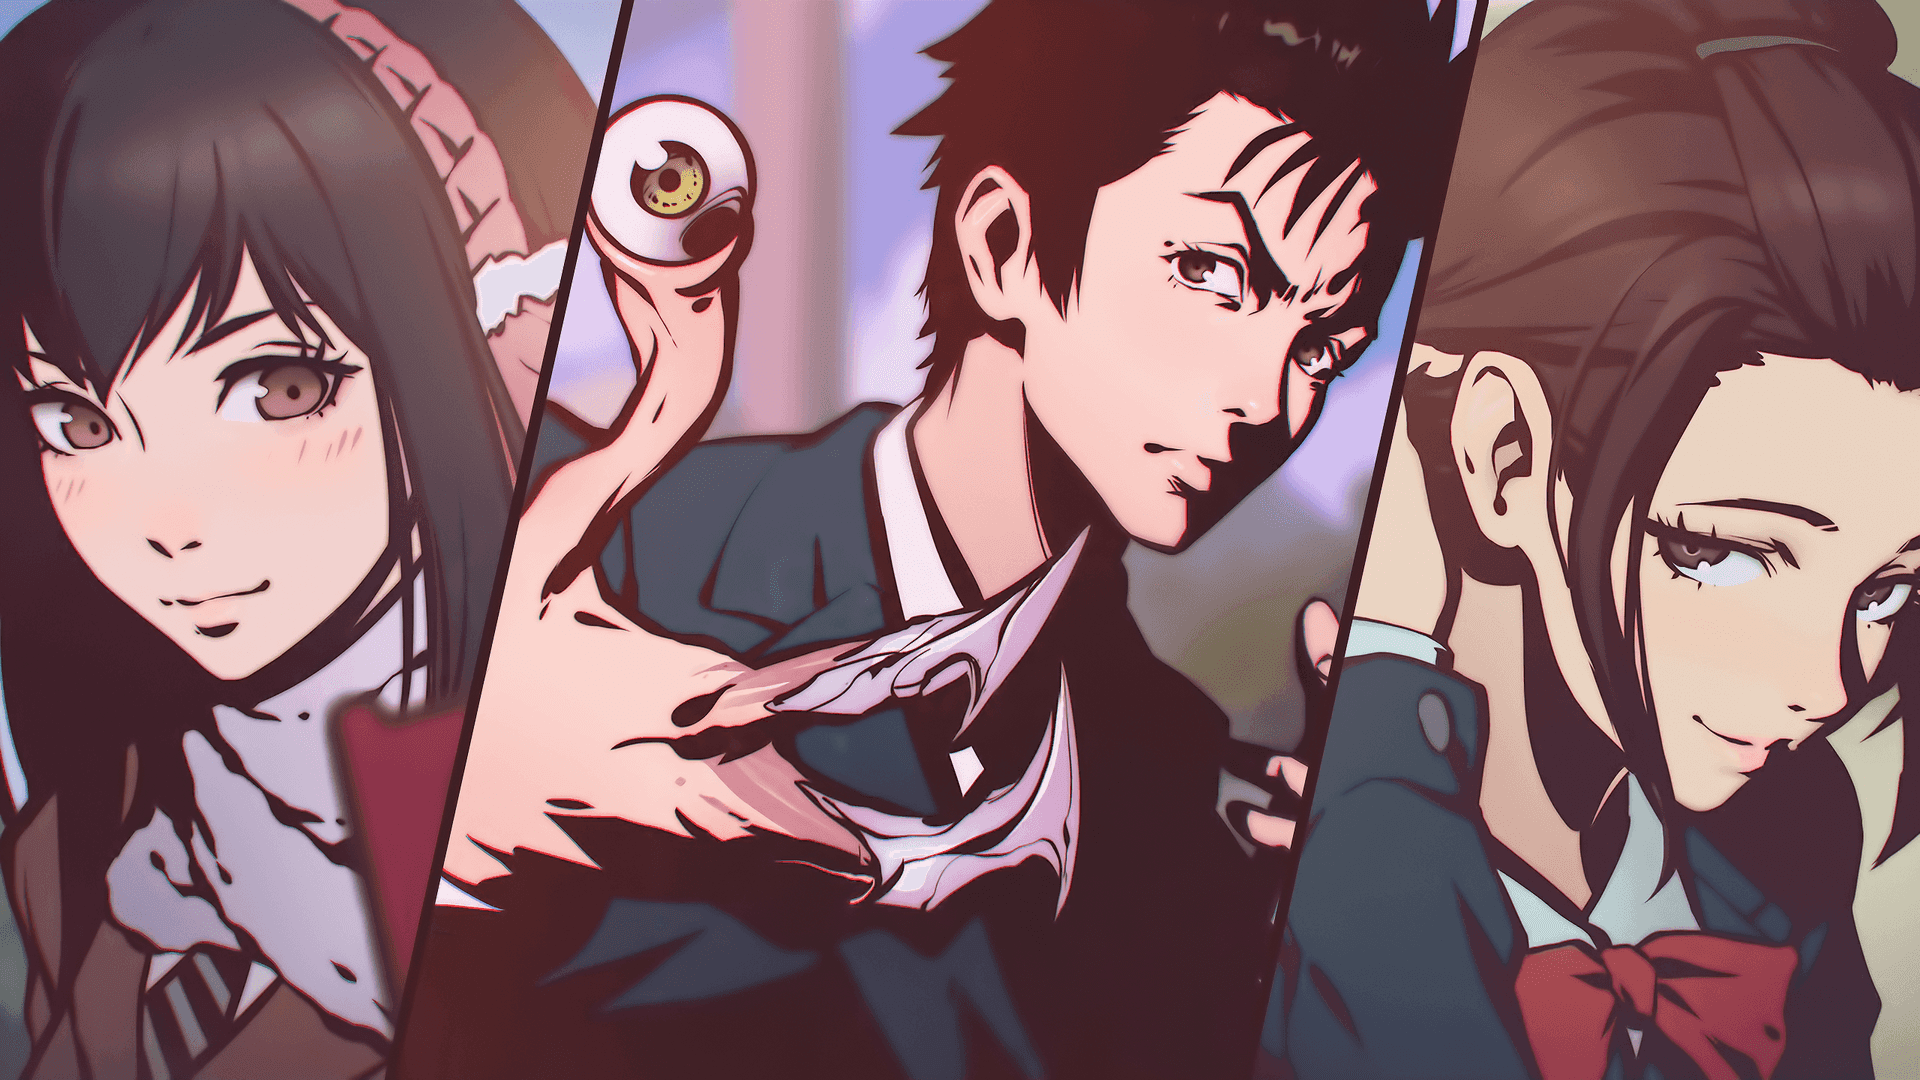 100+] Parasyte Wallpapers | Wallpapers.com